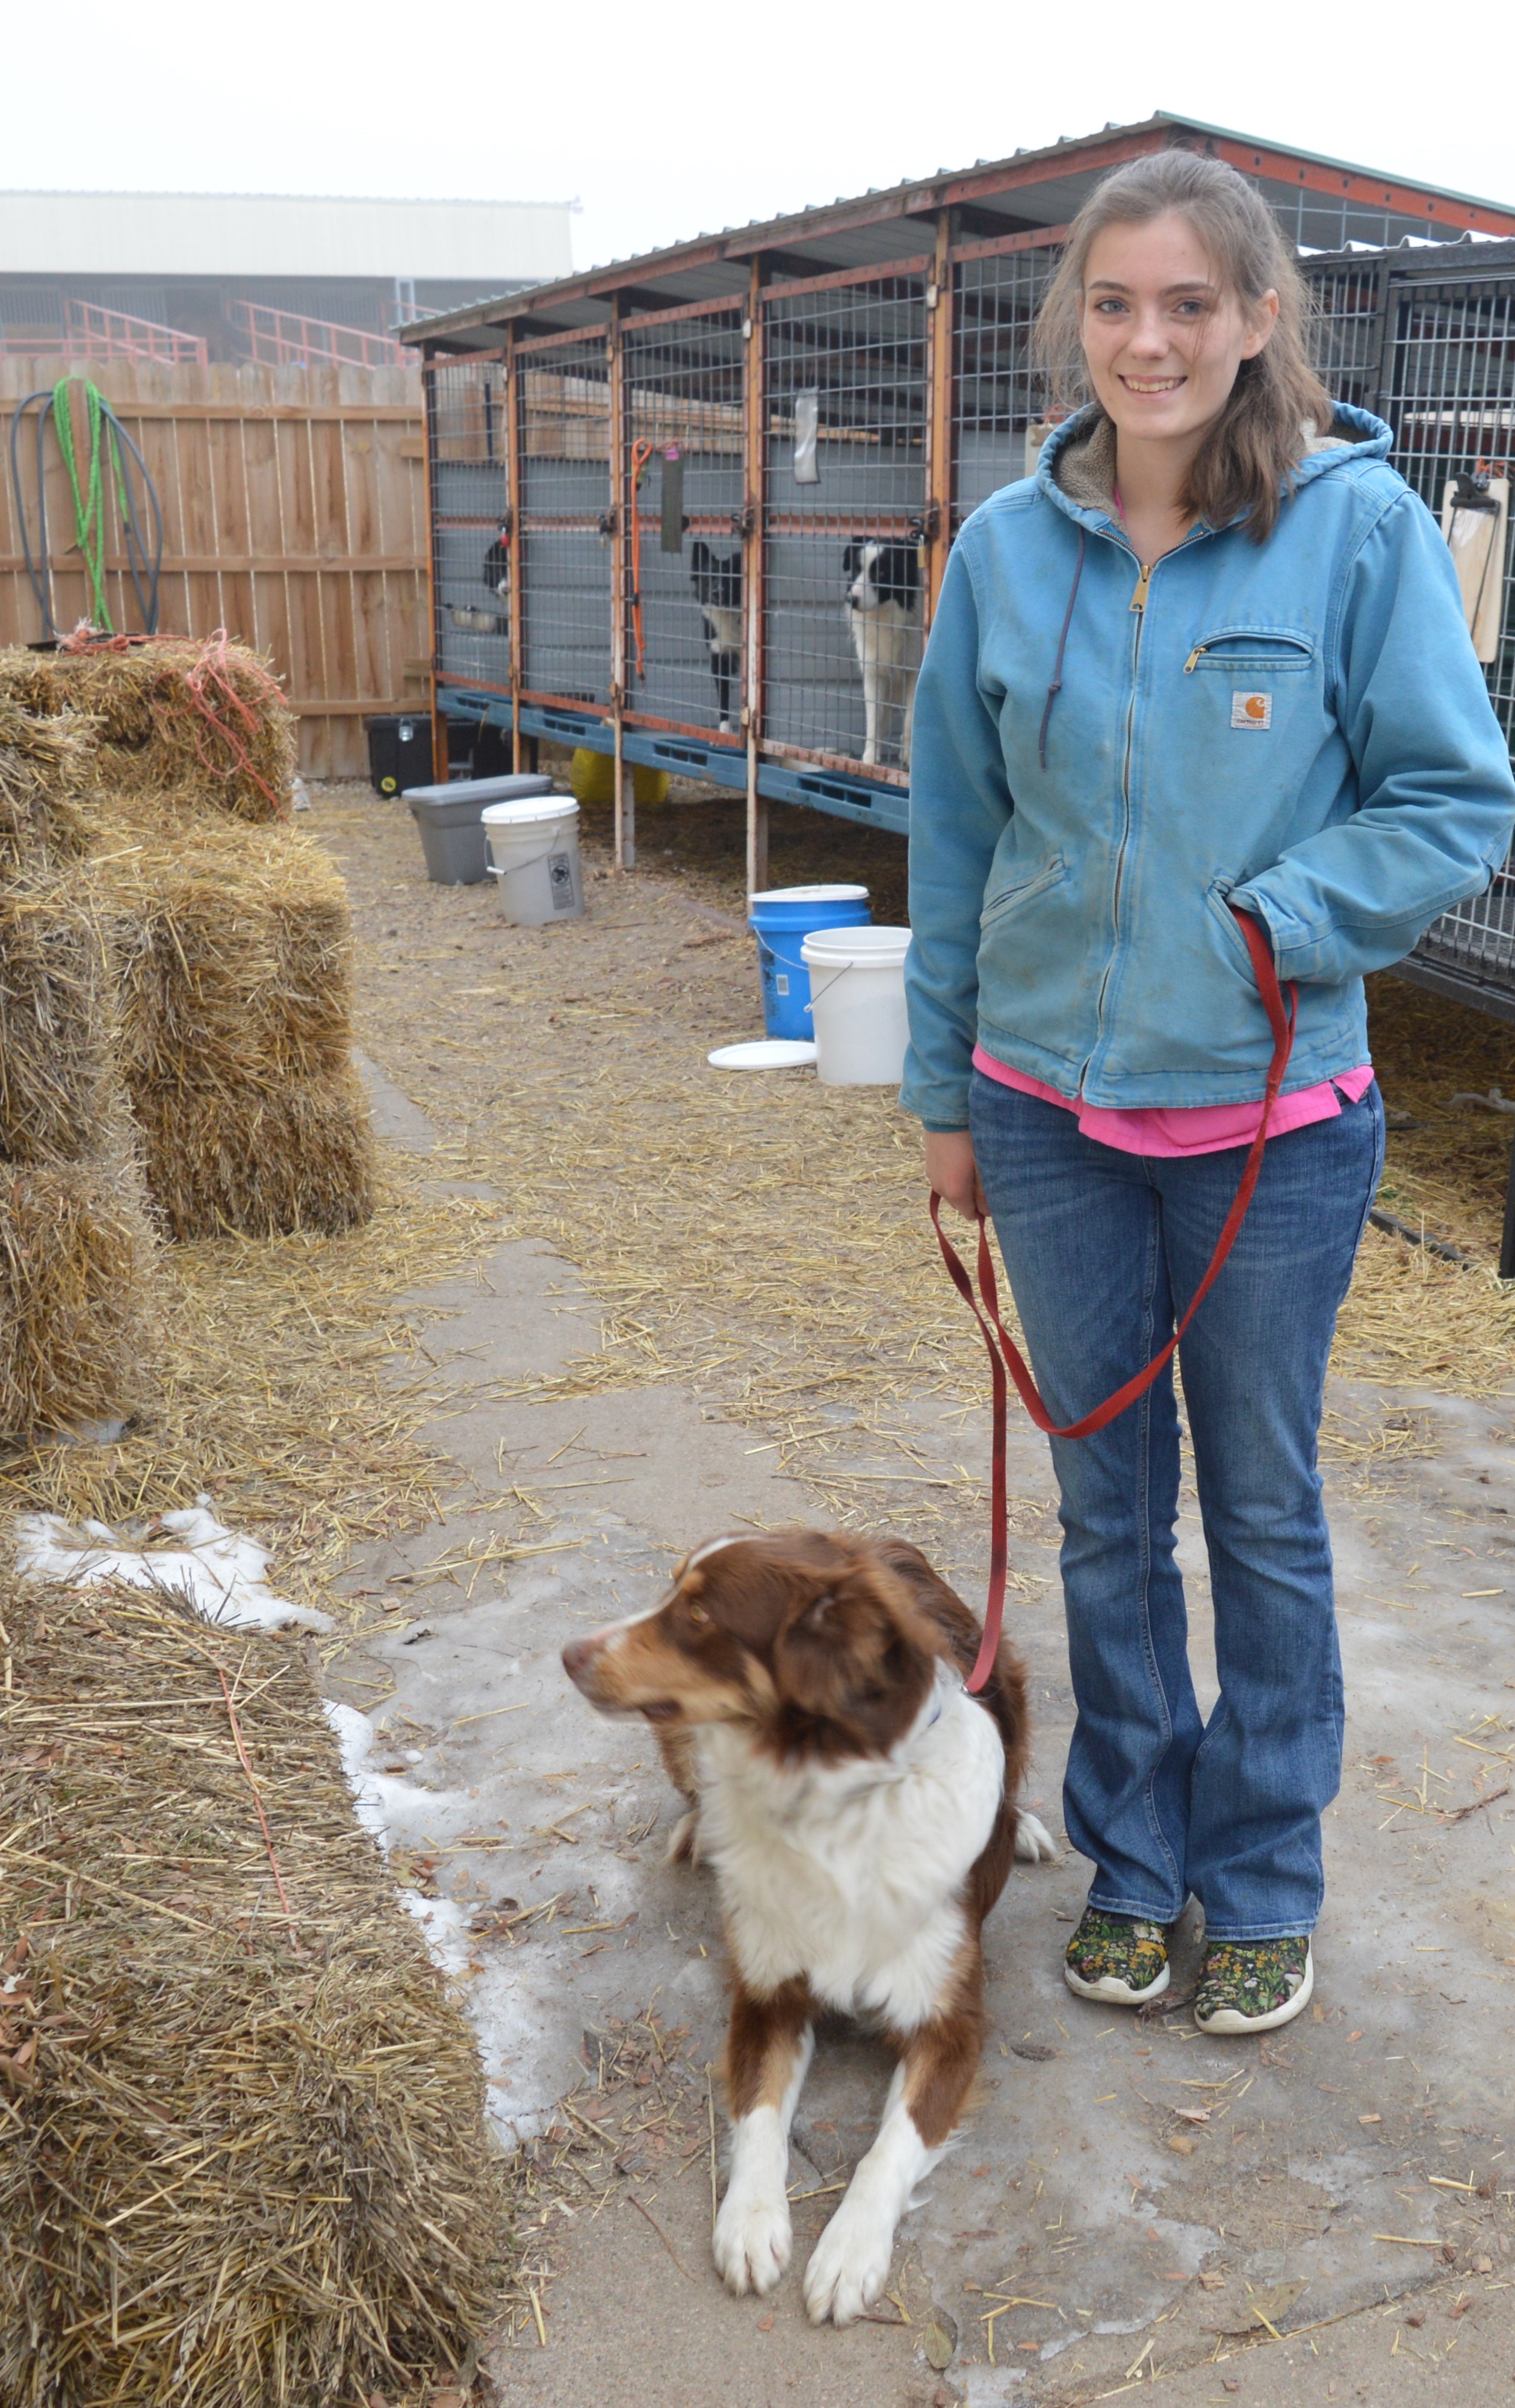 Emily Hubbell of Lexington is a member of the NCTA Stock Dog Club and boards Kota at the campus dog kennel. (Angela Crouse photo for NCTA News) 